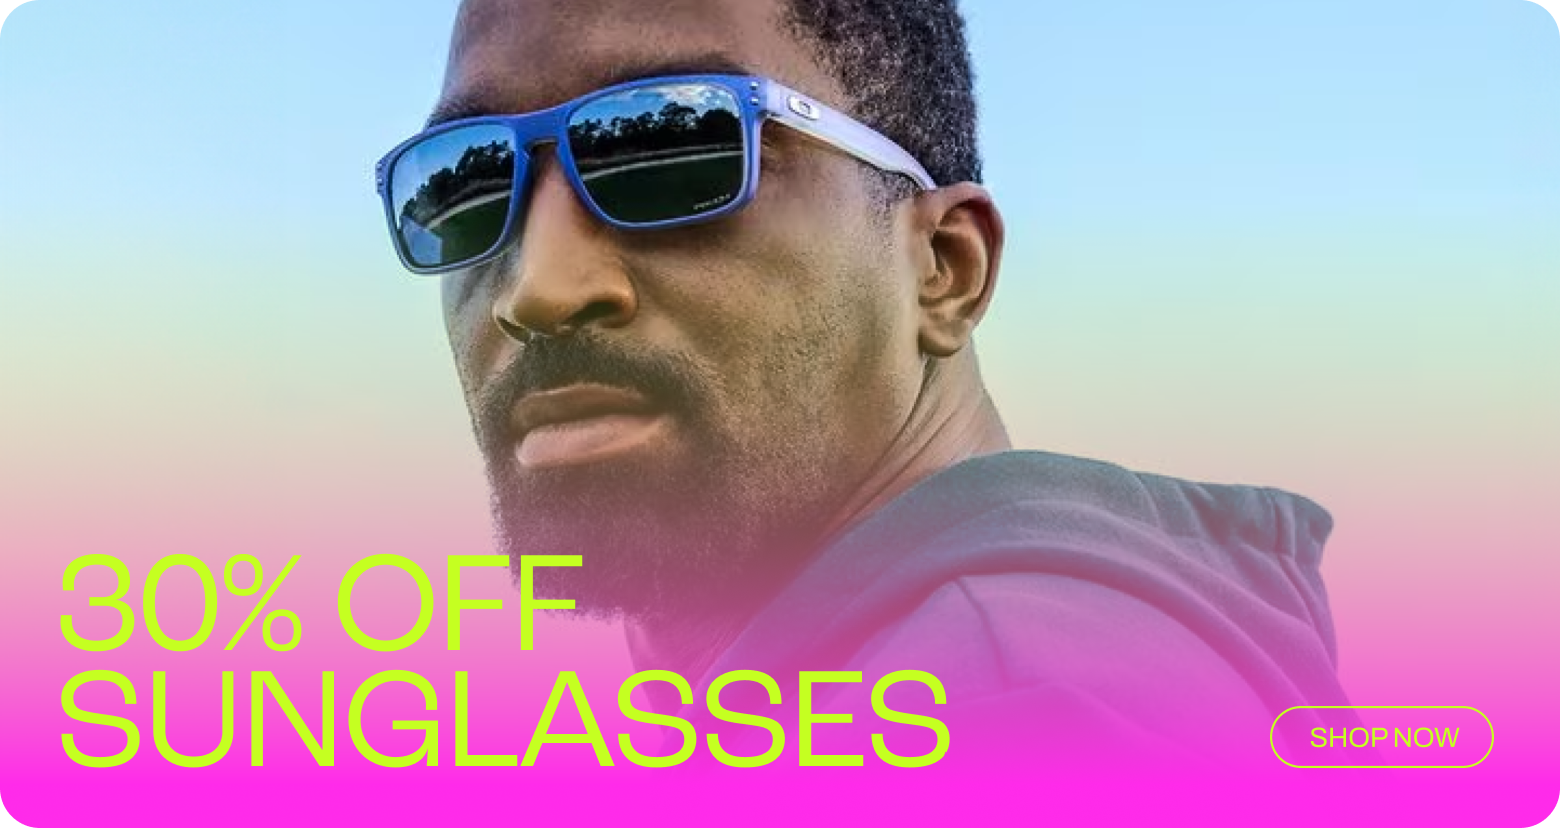 Up to 30% Off Sunglasses